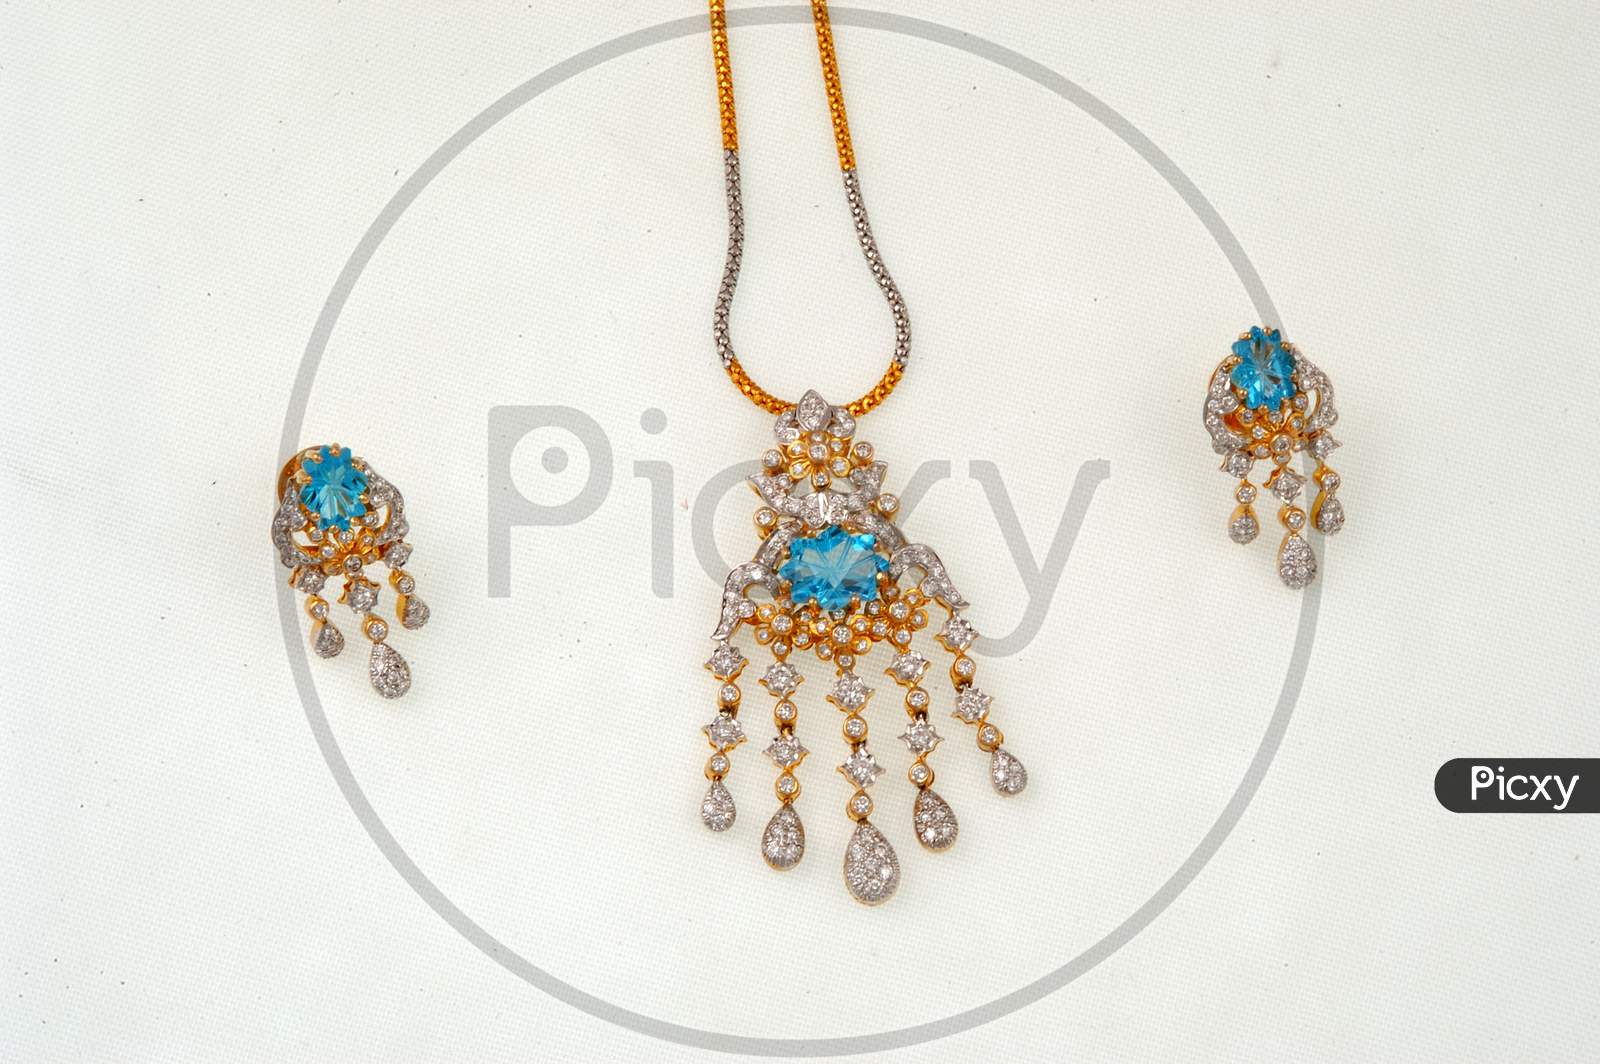 Necklace Jewelery With Gemstones On An Isolated White Background